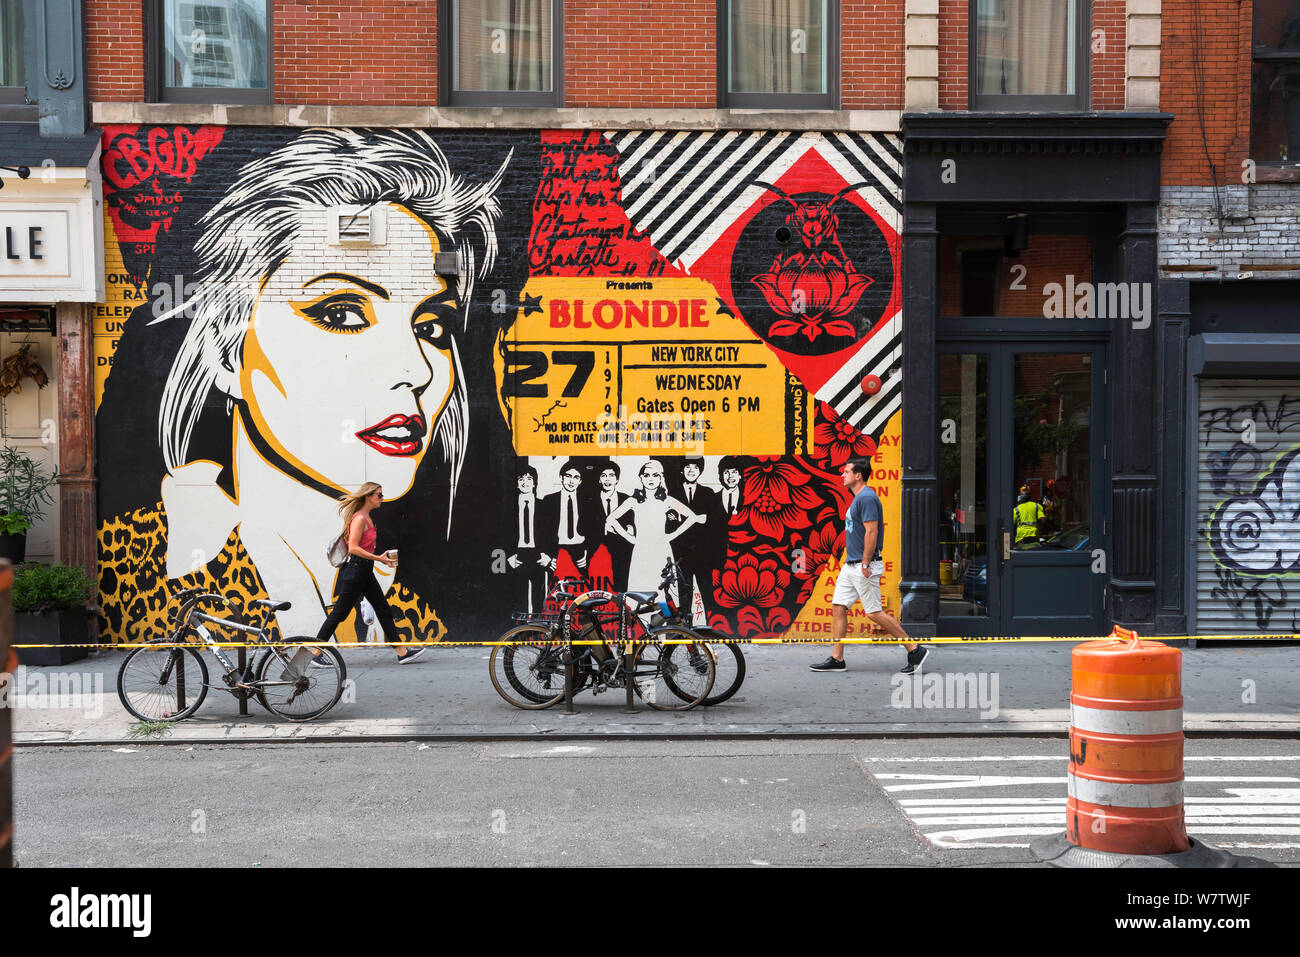 East Village New York, view in summer of street art in the East Village /  Bowery celebrating the music of Debbie Harry and Blondie, Manhattan, NYC Stock Photo